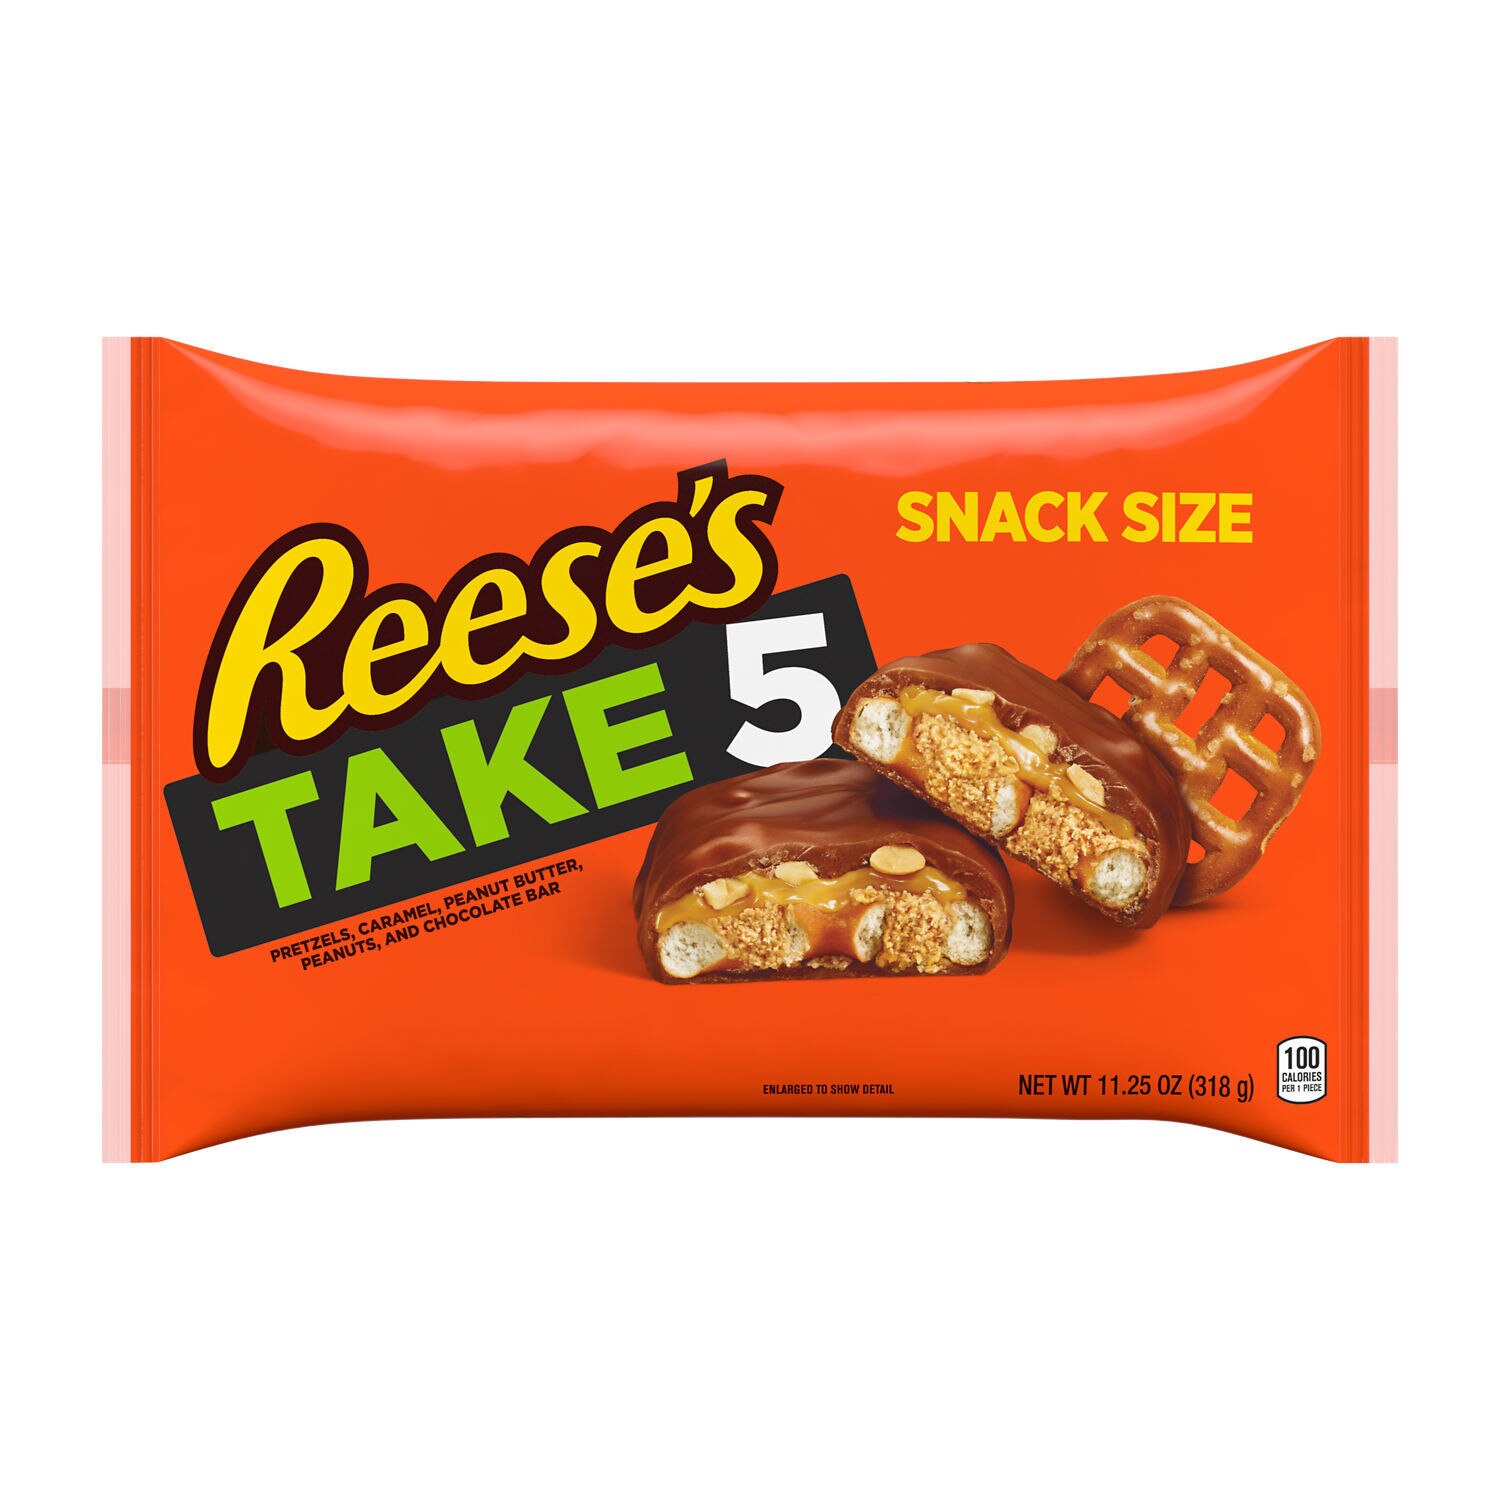 REESE'S TAKE 5 Snack Size Candy Bars, 11.25 OZ